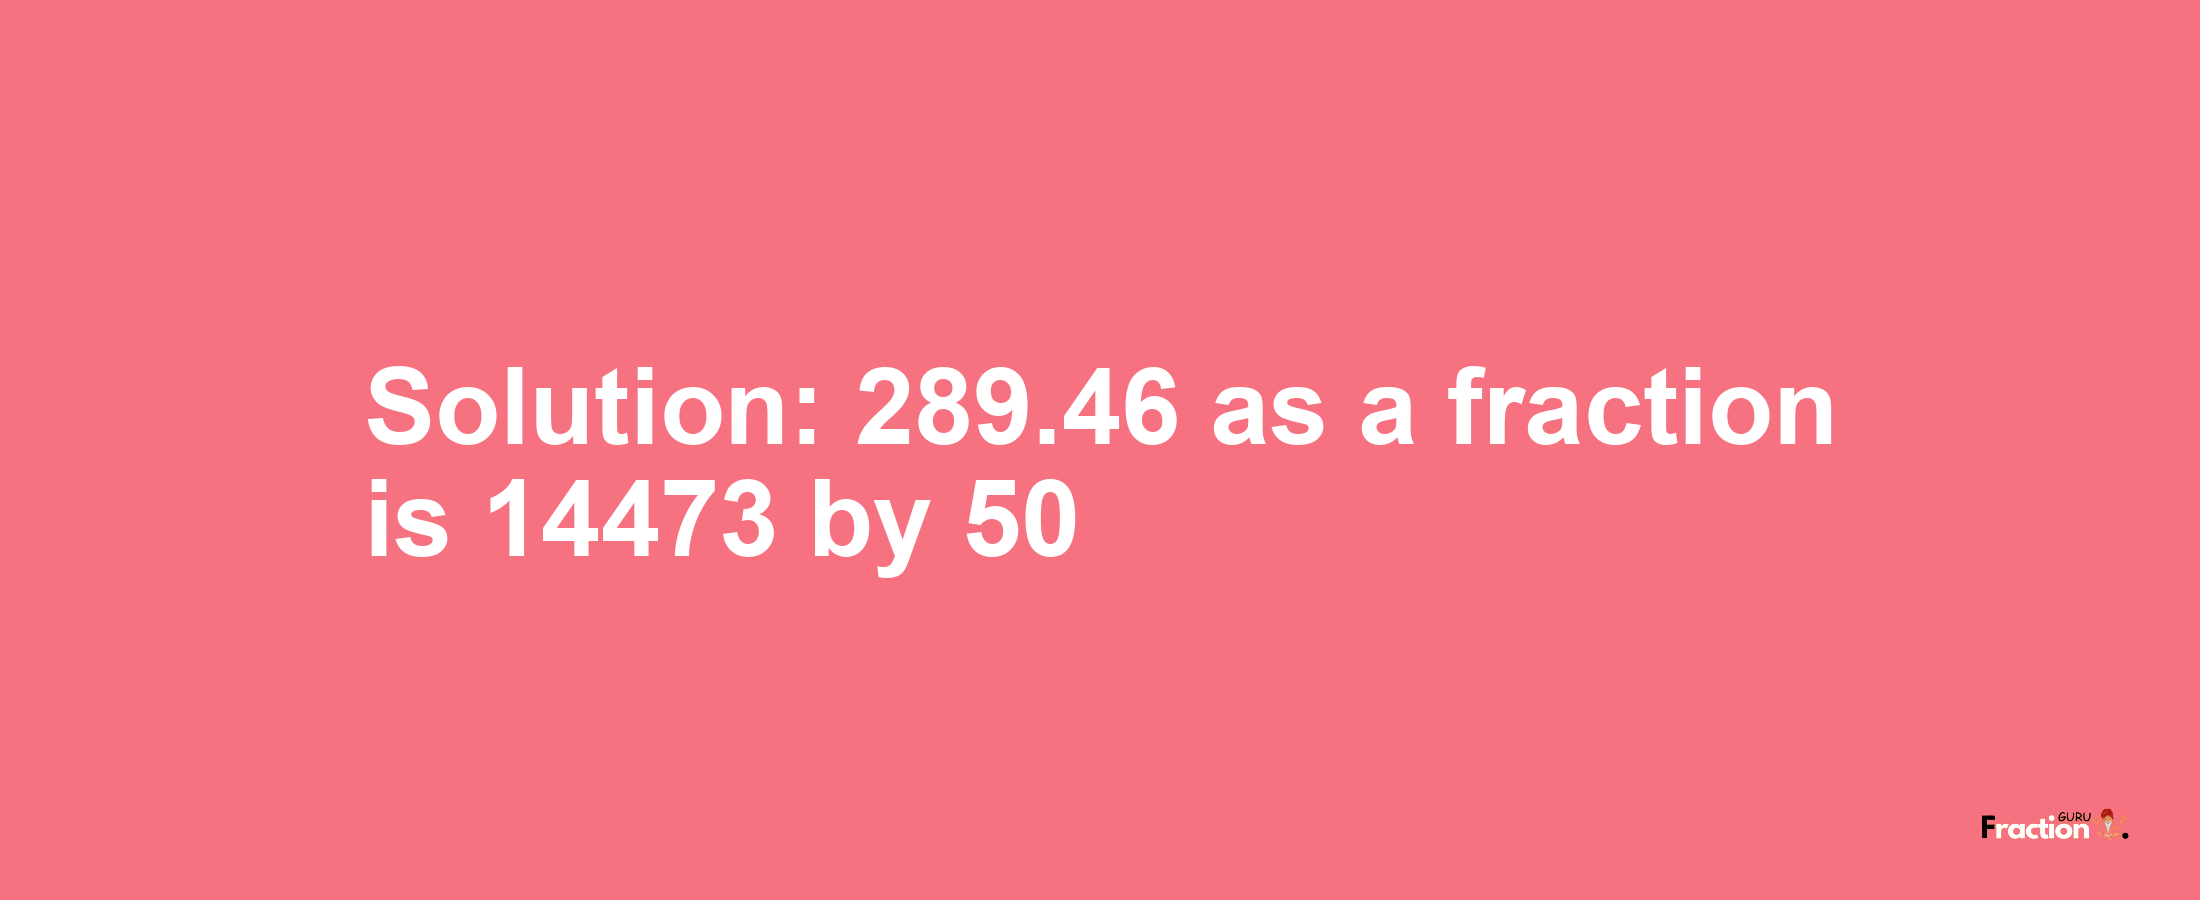 Solution:289.46 as a fraction is 14473/50